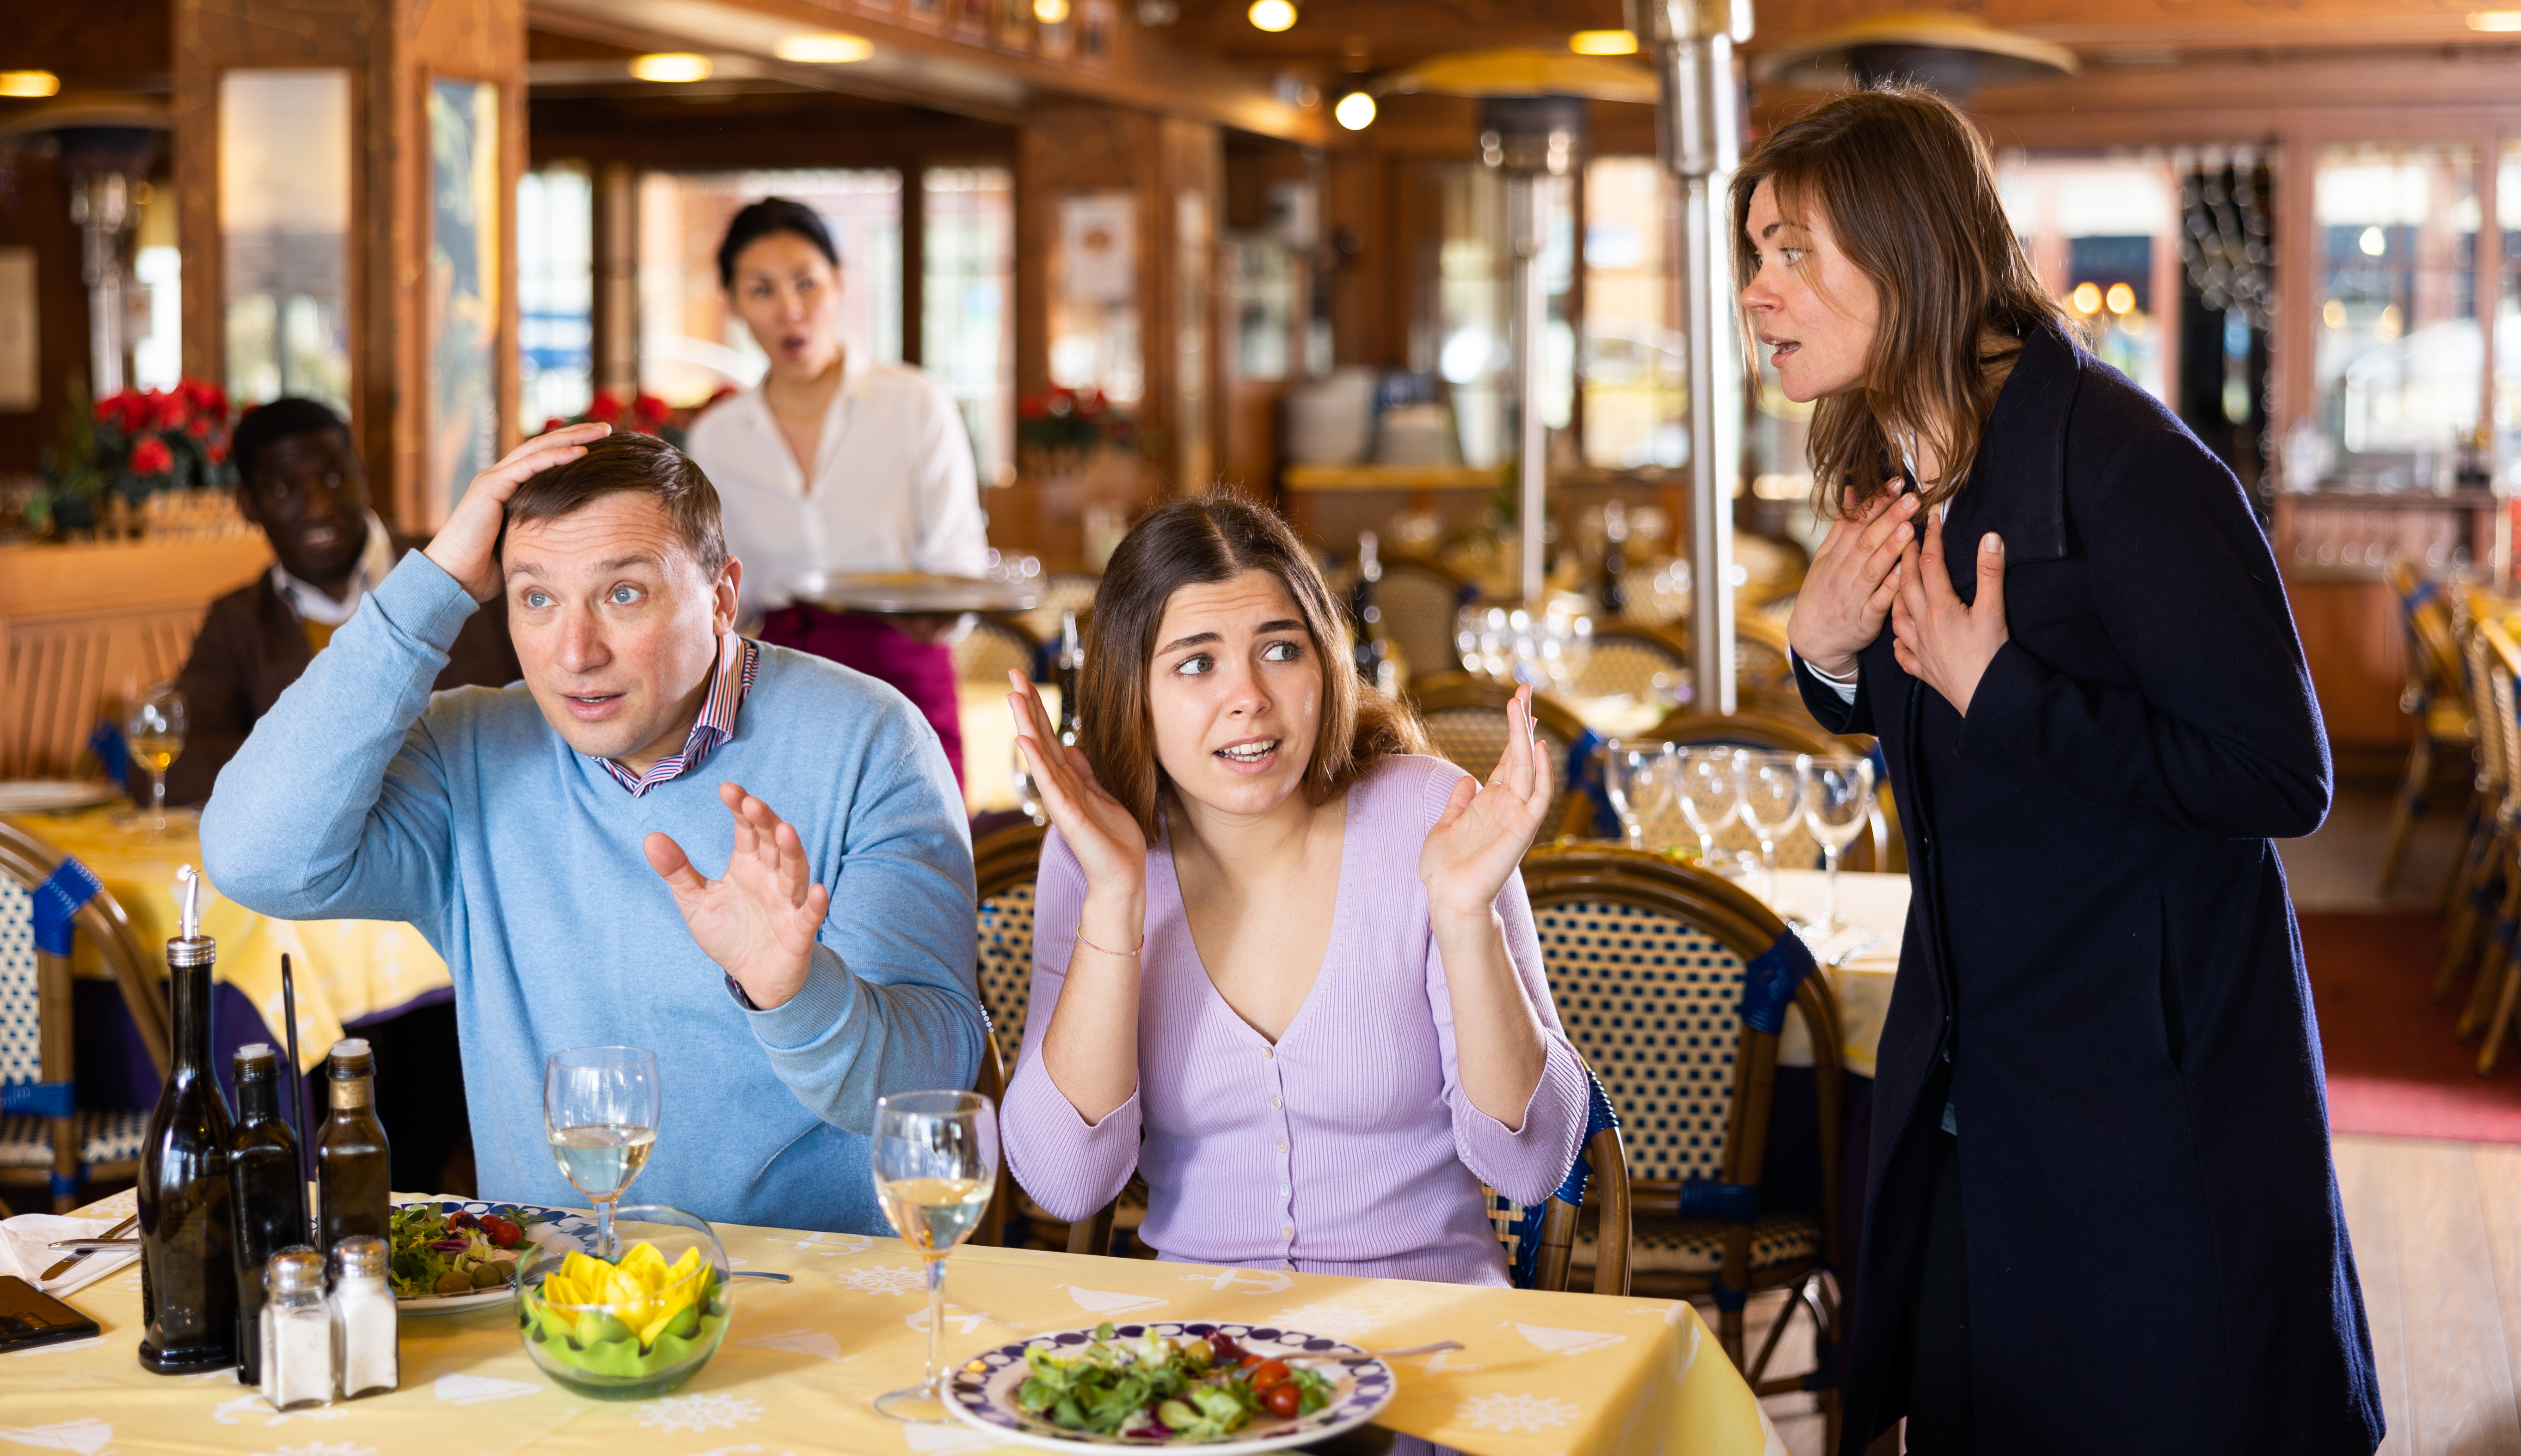 People arguing in a restaurant | Source: Getty Images